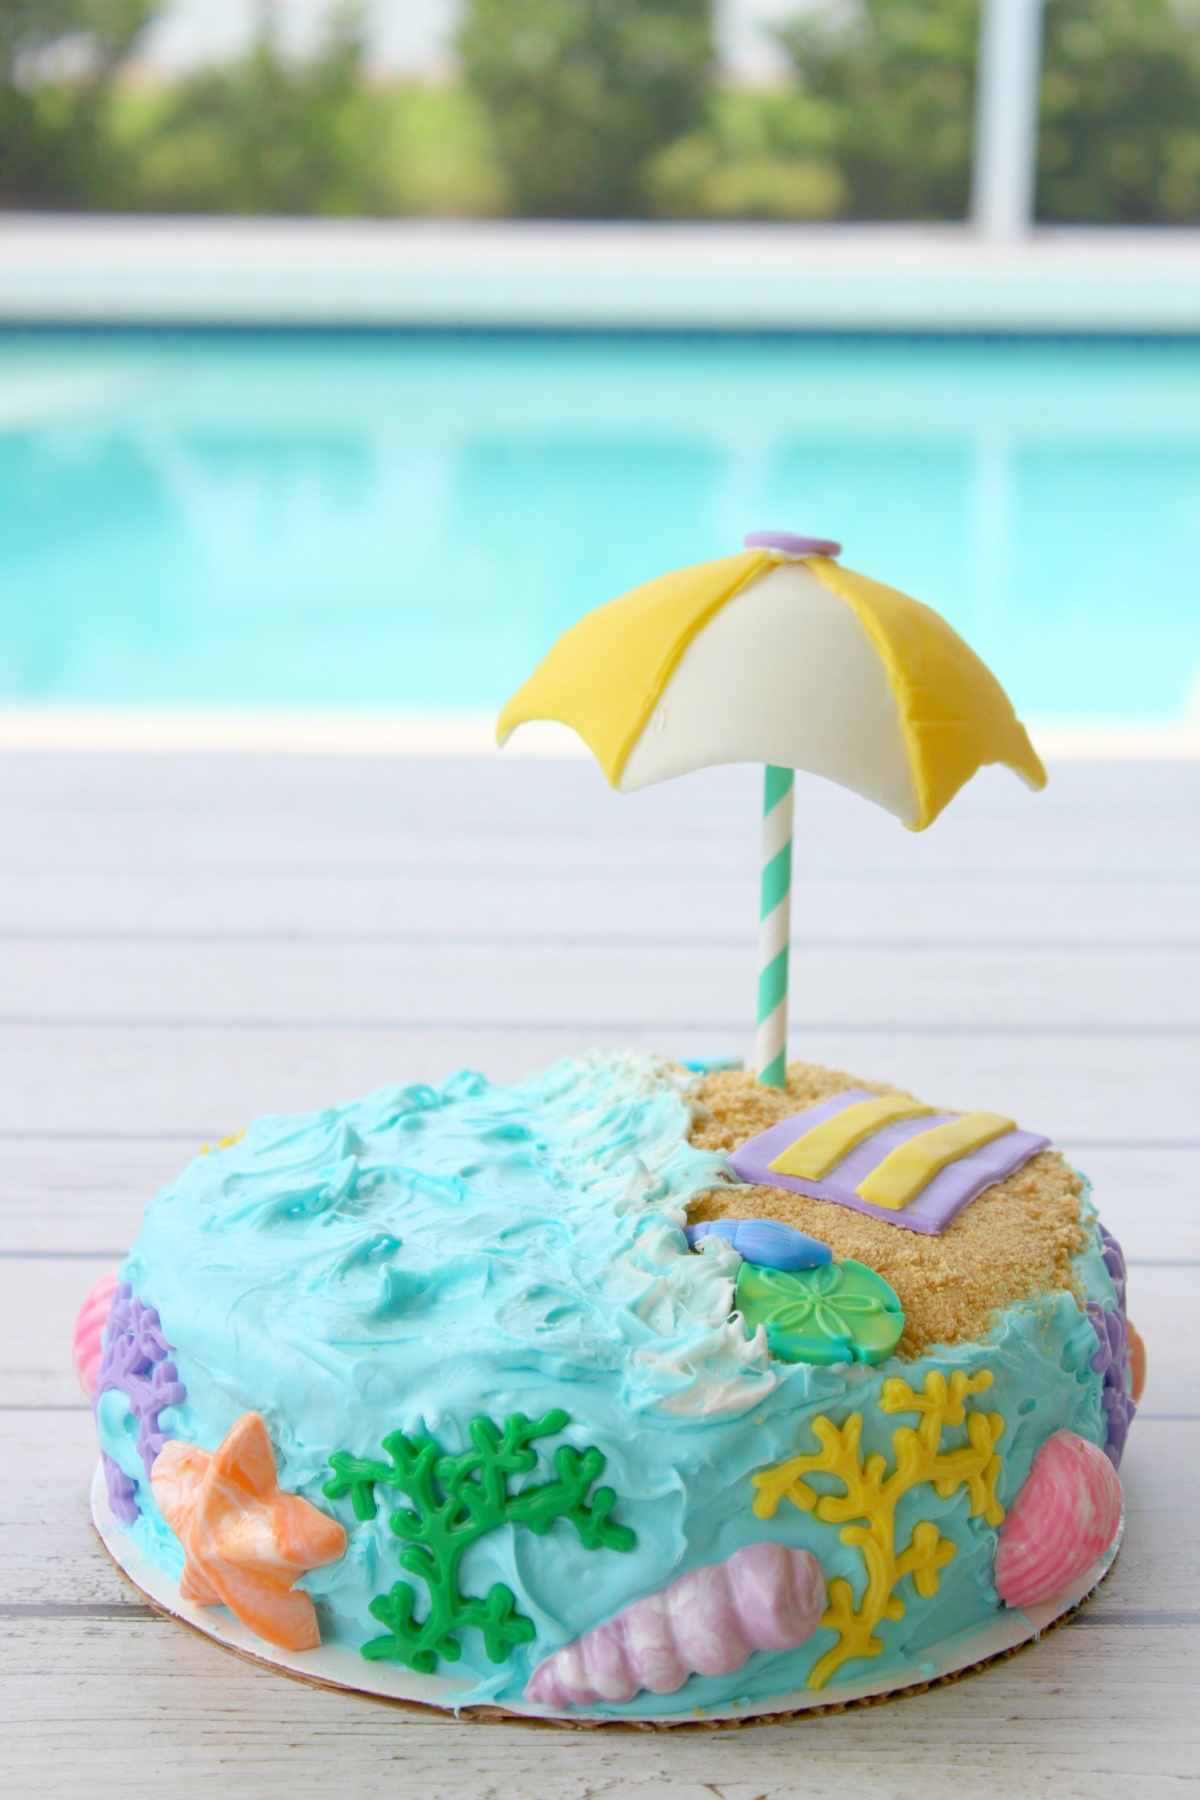 A beach cake adorned with an umbrella, perfect for a summer celebration.